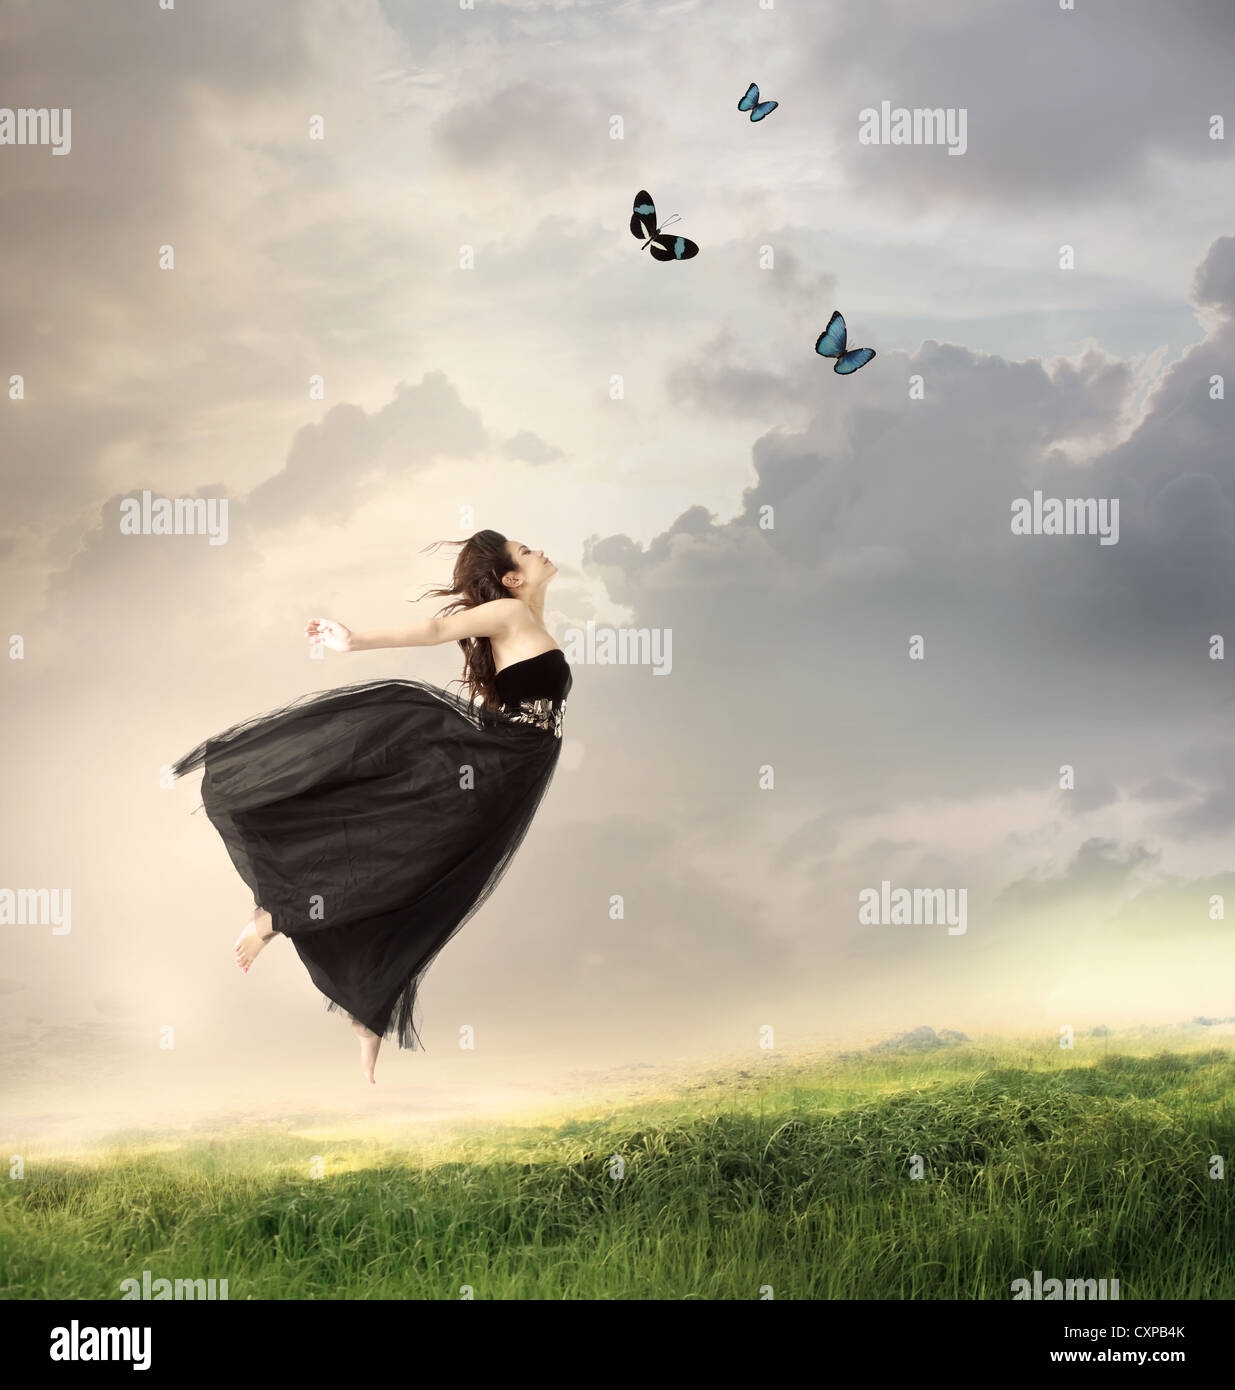 Beautiful Girl Jumping in the Air on a Mountain Stock Photo